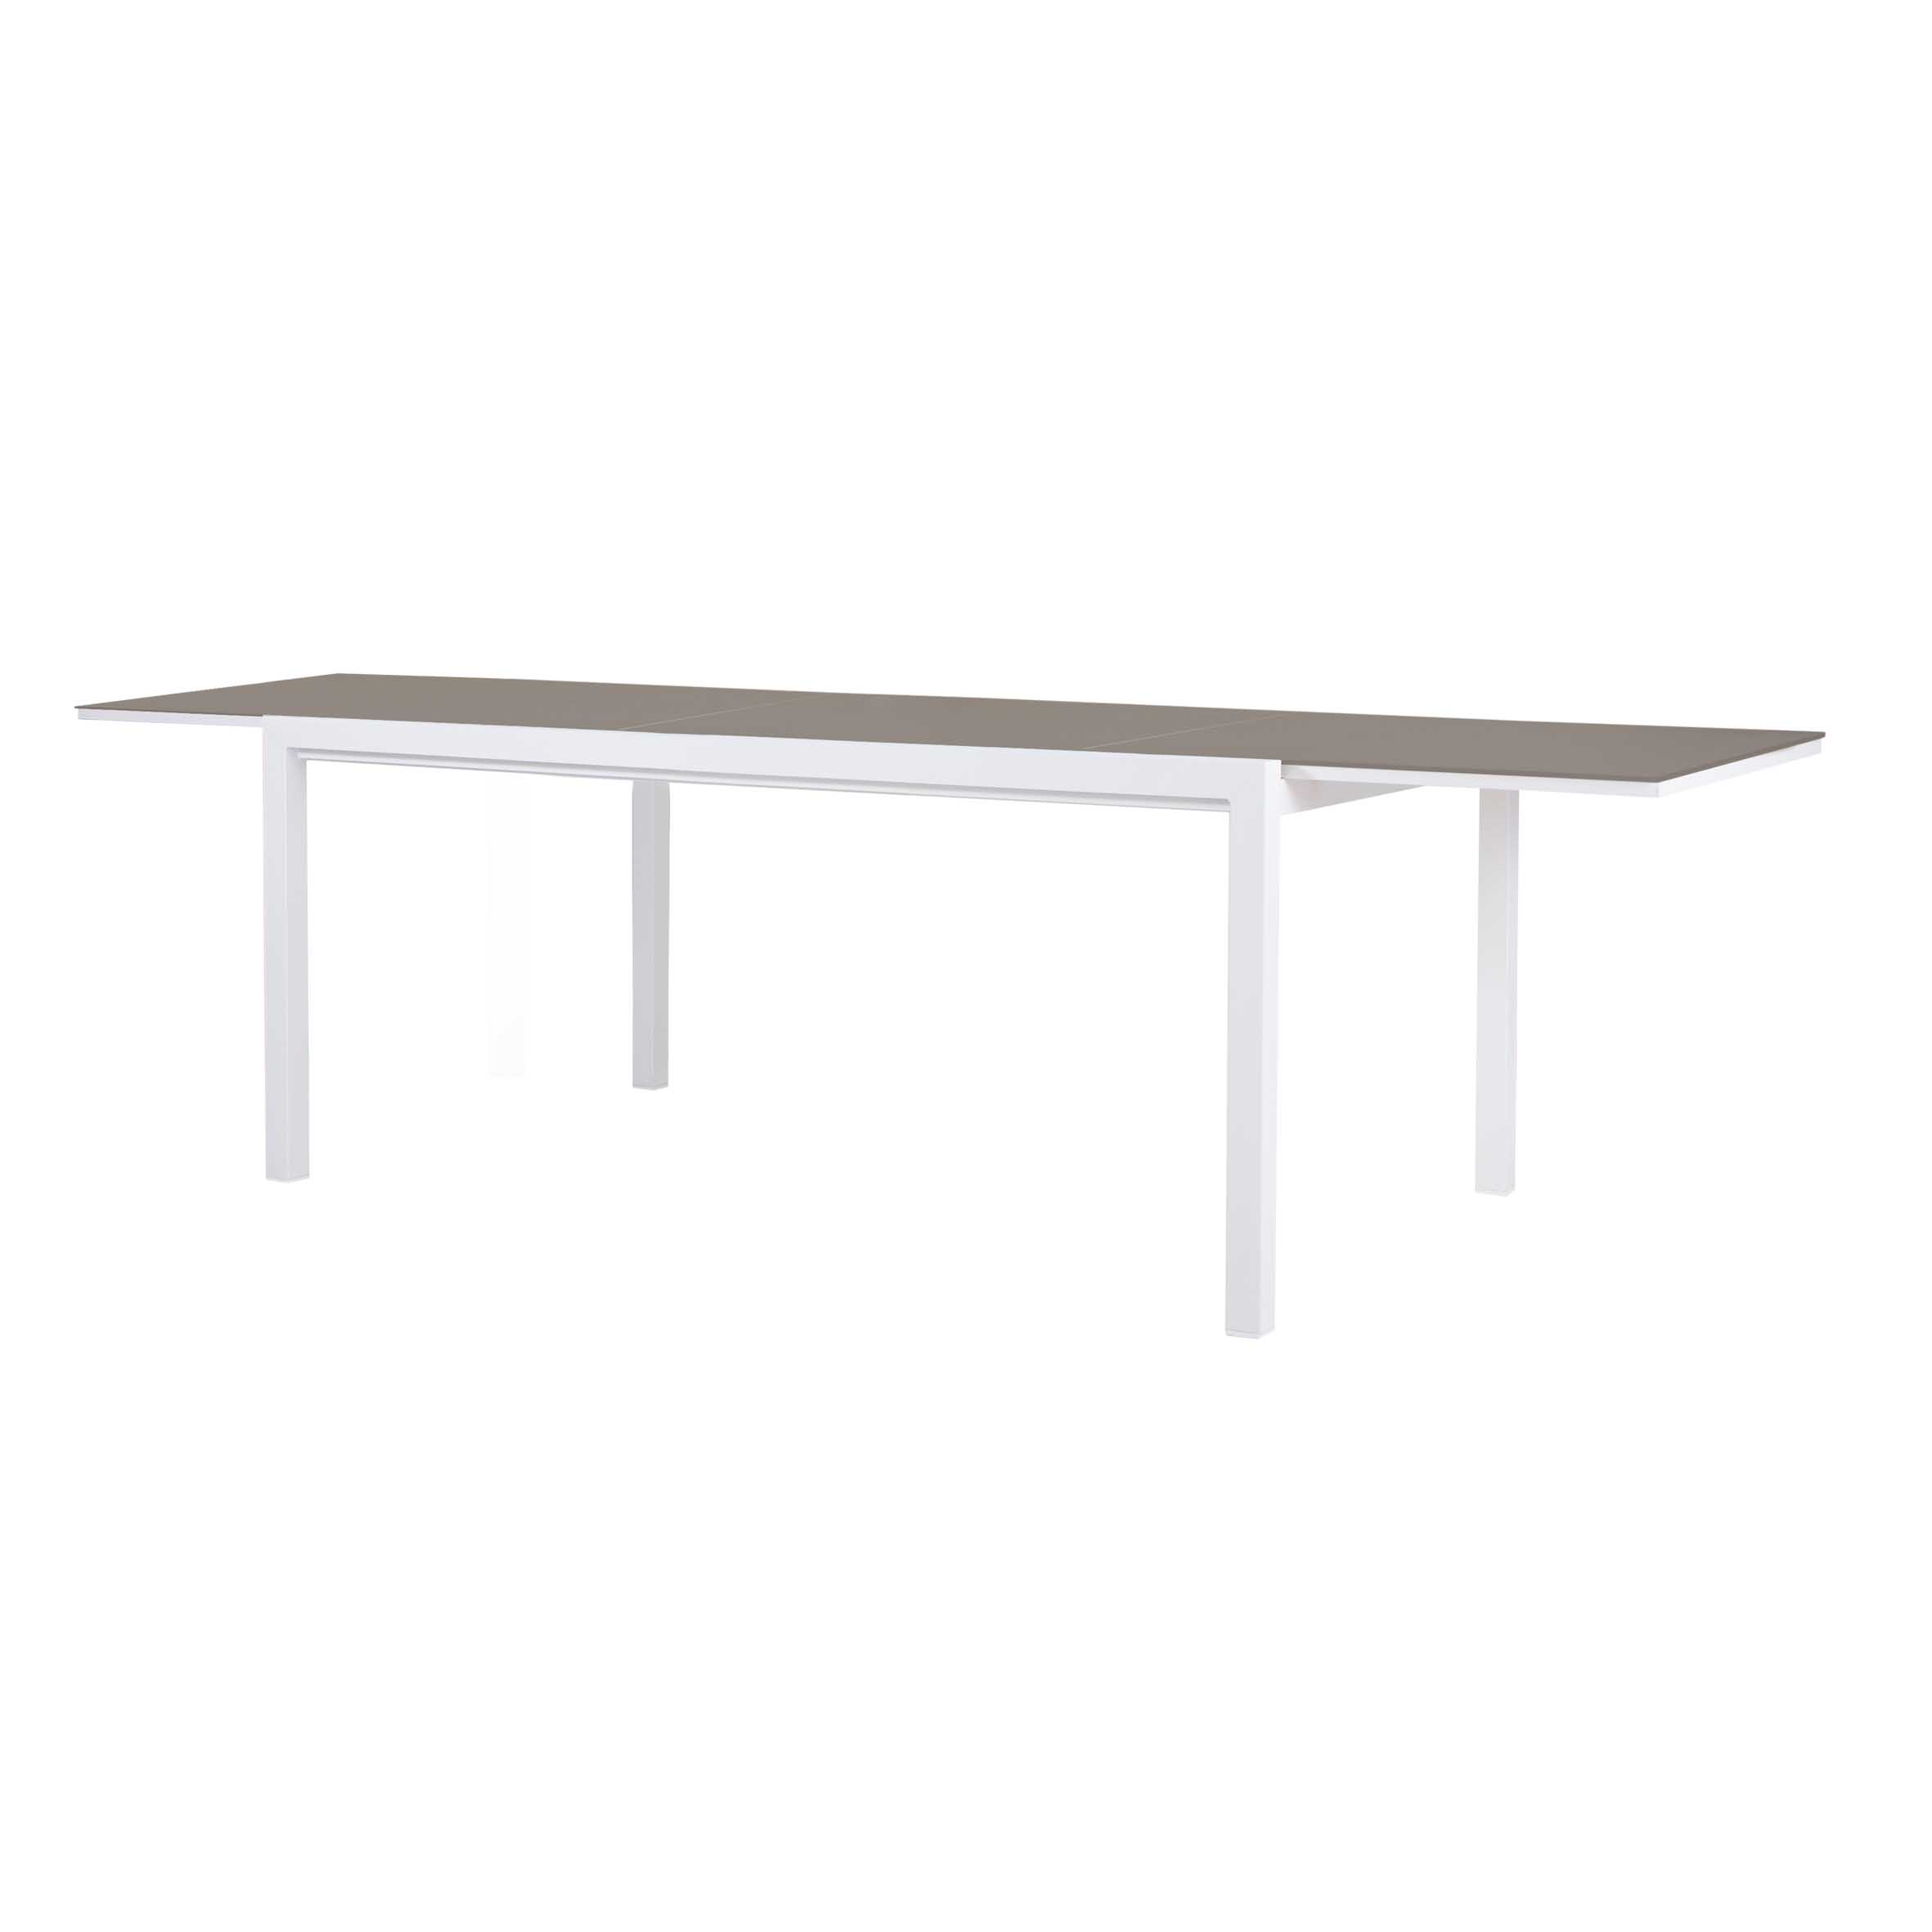 Kotka extension table S15